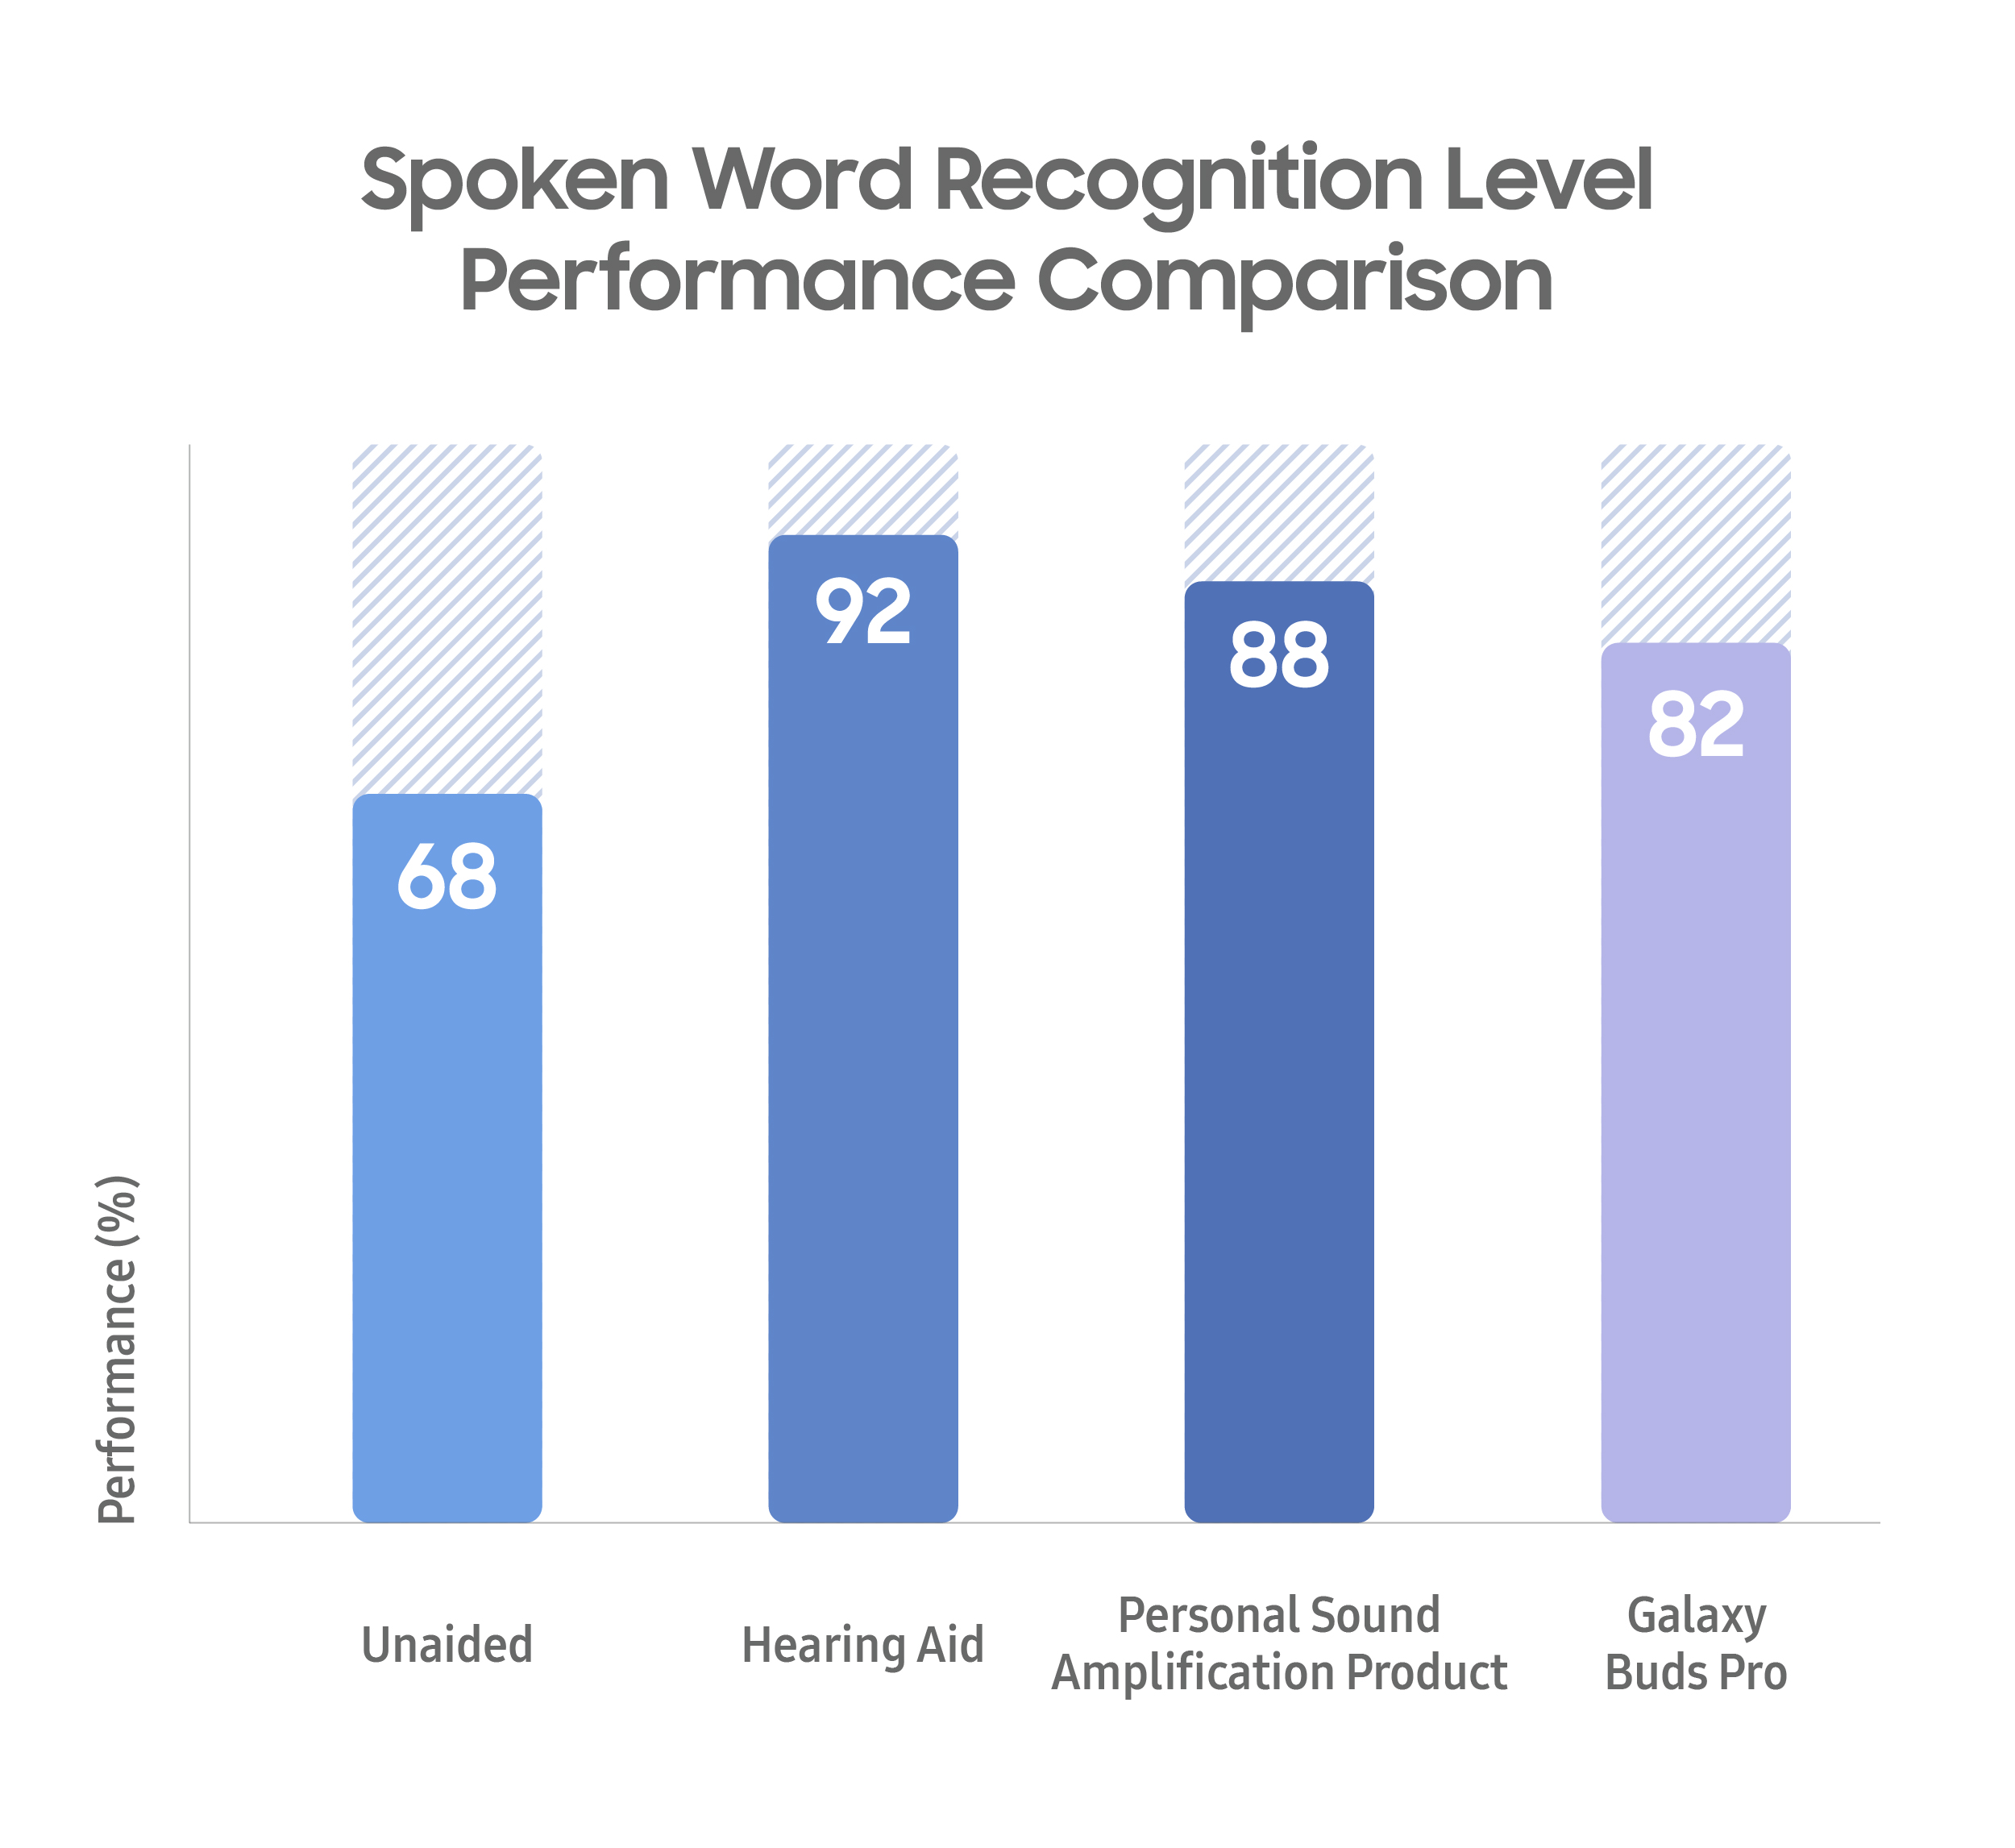 Spoken word recognition level performance comparison between unaided, hearing aid, personal sound amplification product and galaxy buds pro